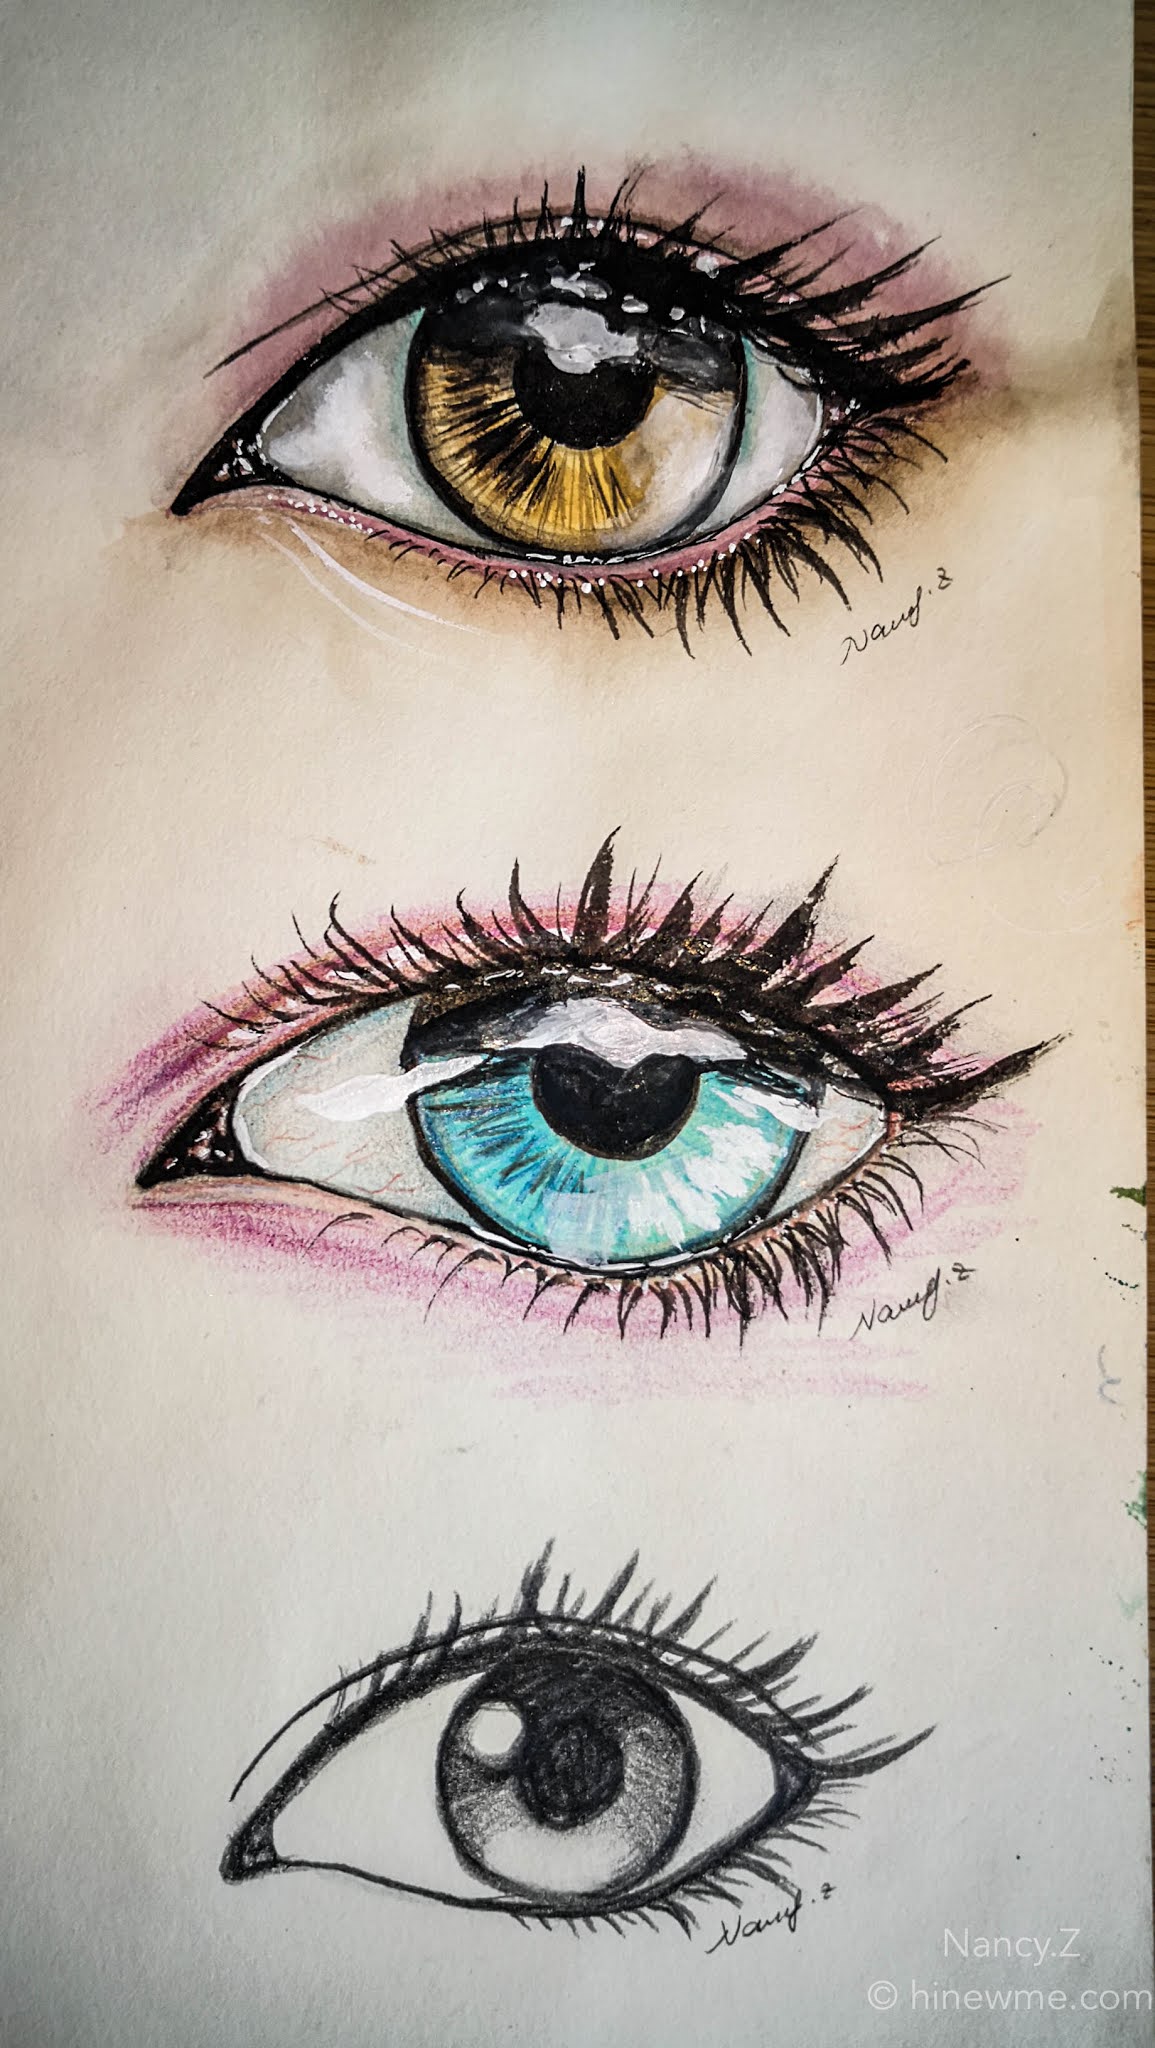 6Easy ways How to draw eye Tutorial sketch and watercolor step by step, come to see my online class